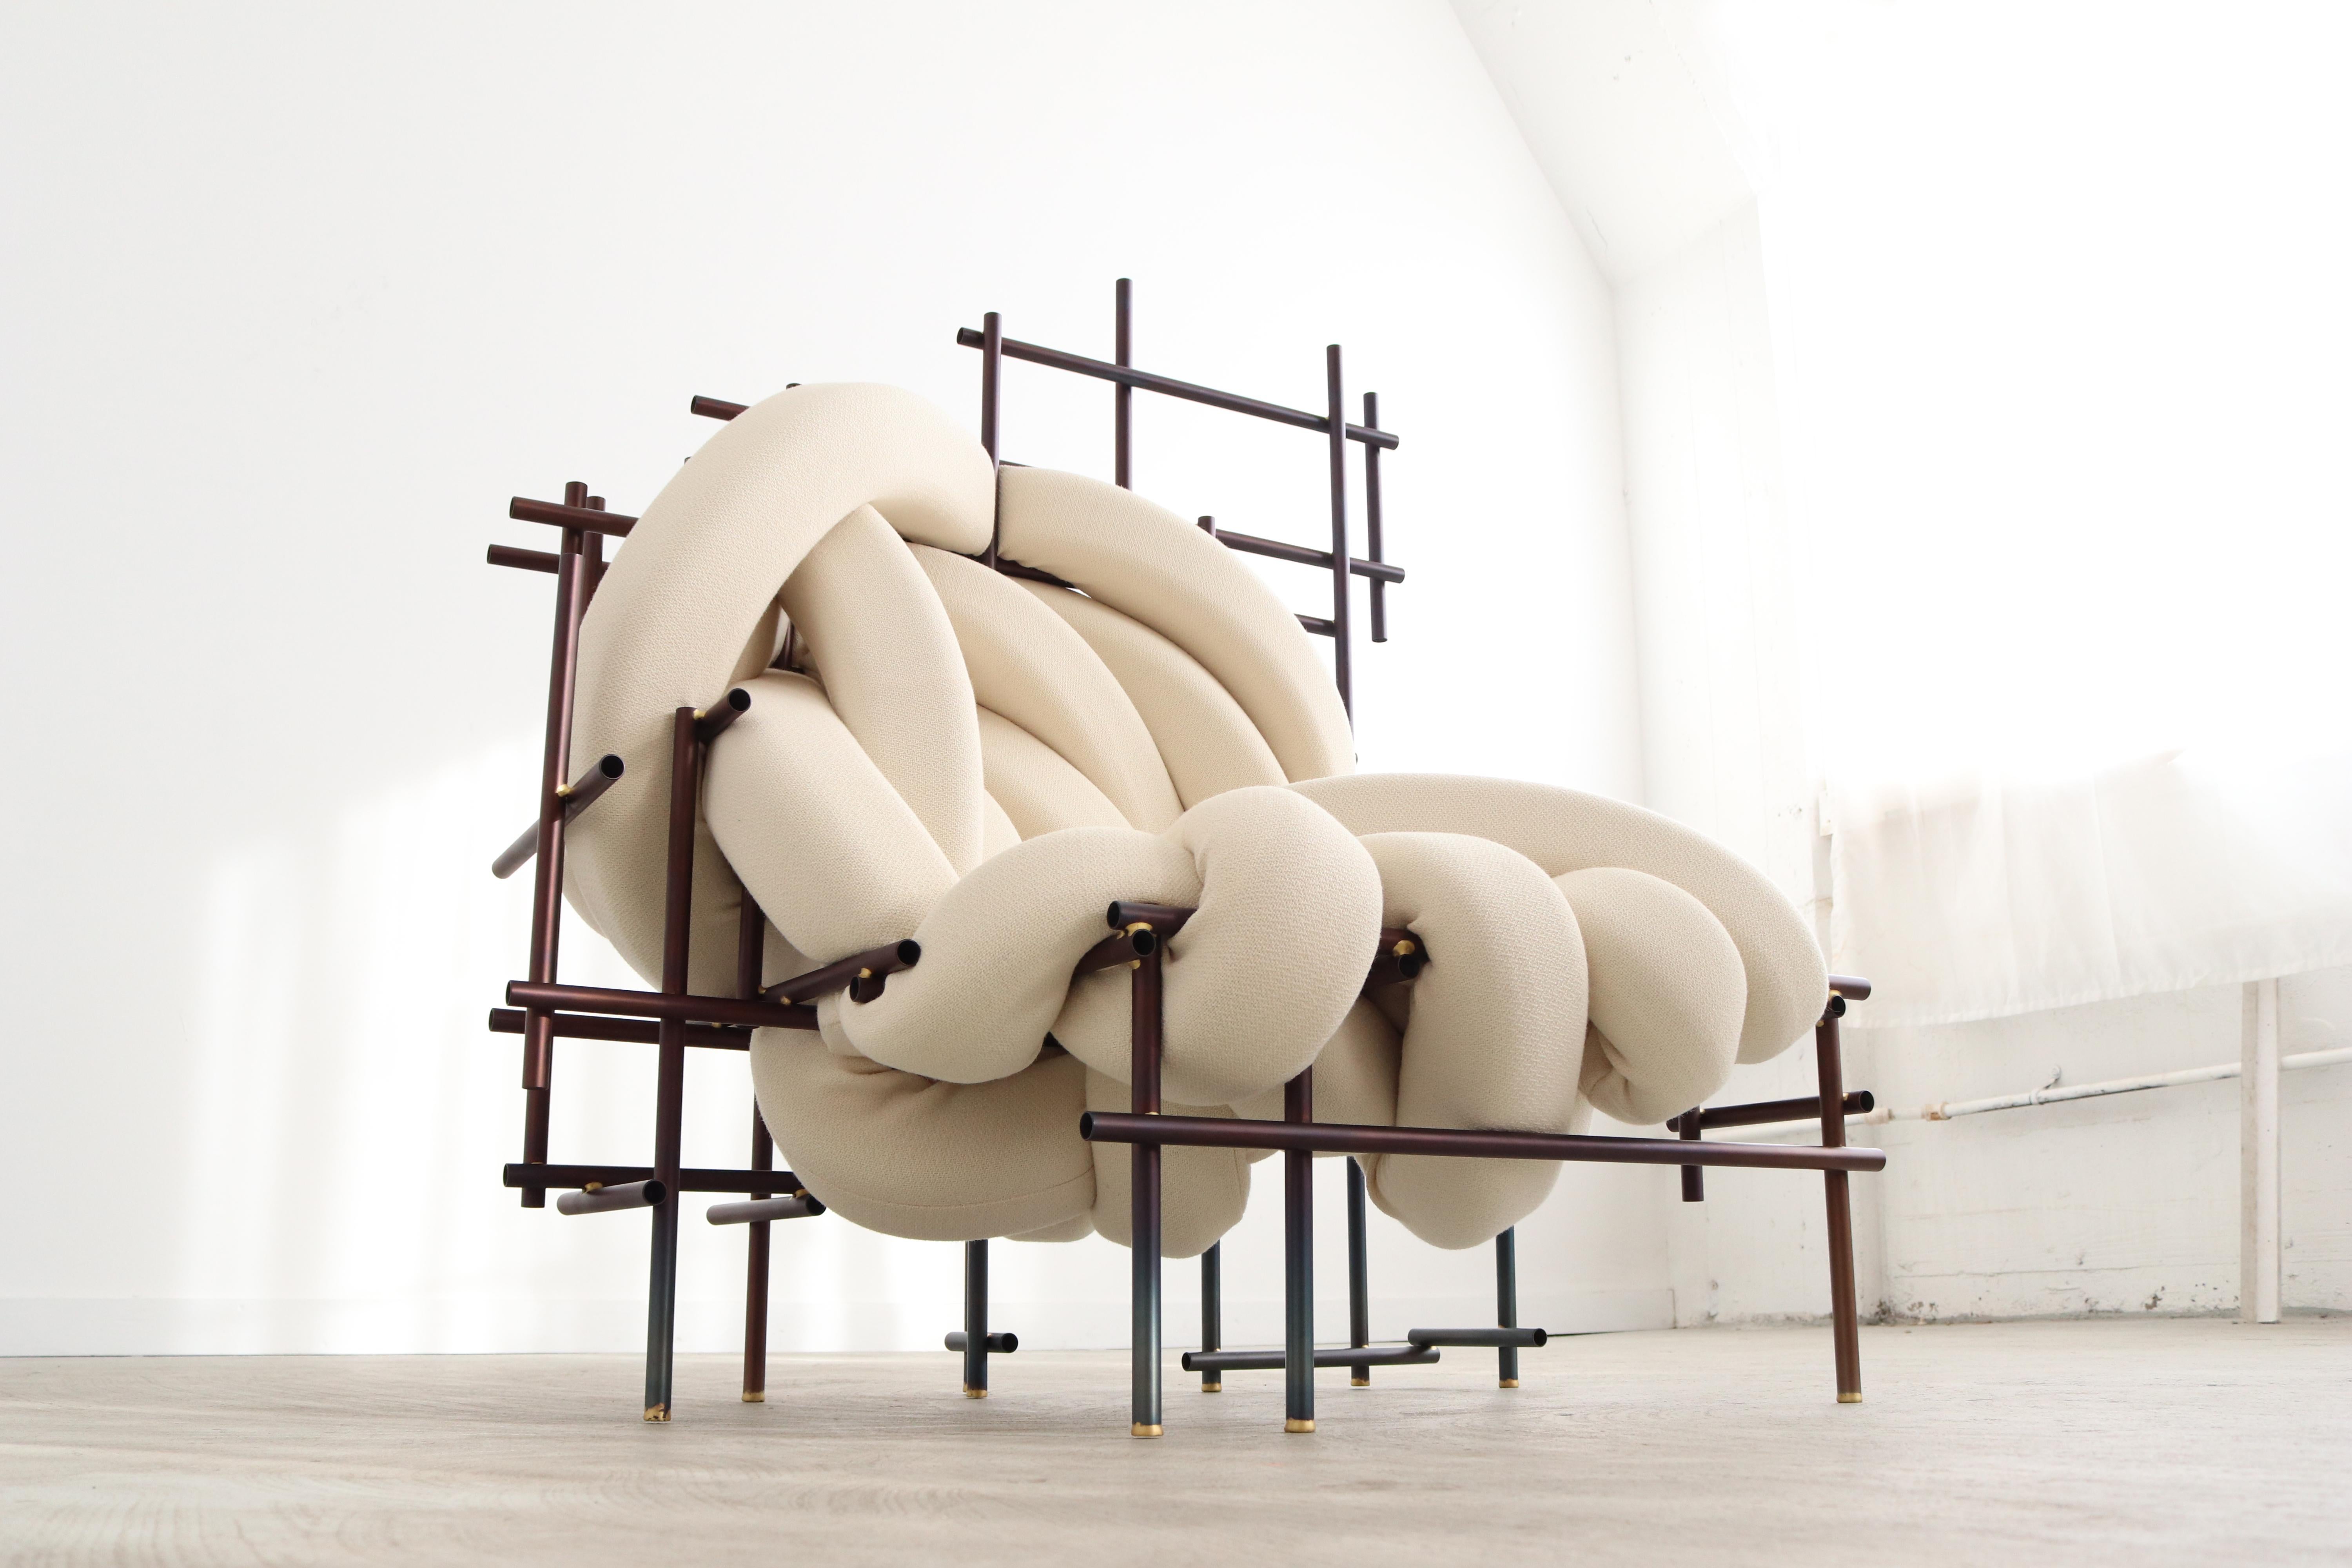 Lawless Fauteuil by Evan Fay
Each is a unique hand-sculpted creation 
Dimensions: 111 x 80 x 120 cm
Materials: Steel pipe, brass connections foam, scuba knit fabric

Lawless chair is a celebration of irregularity within a system, pursuing a